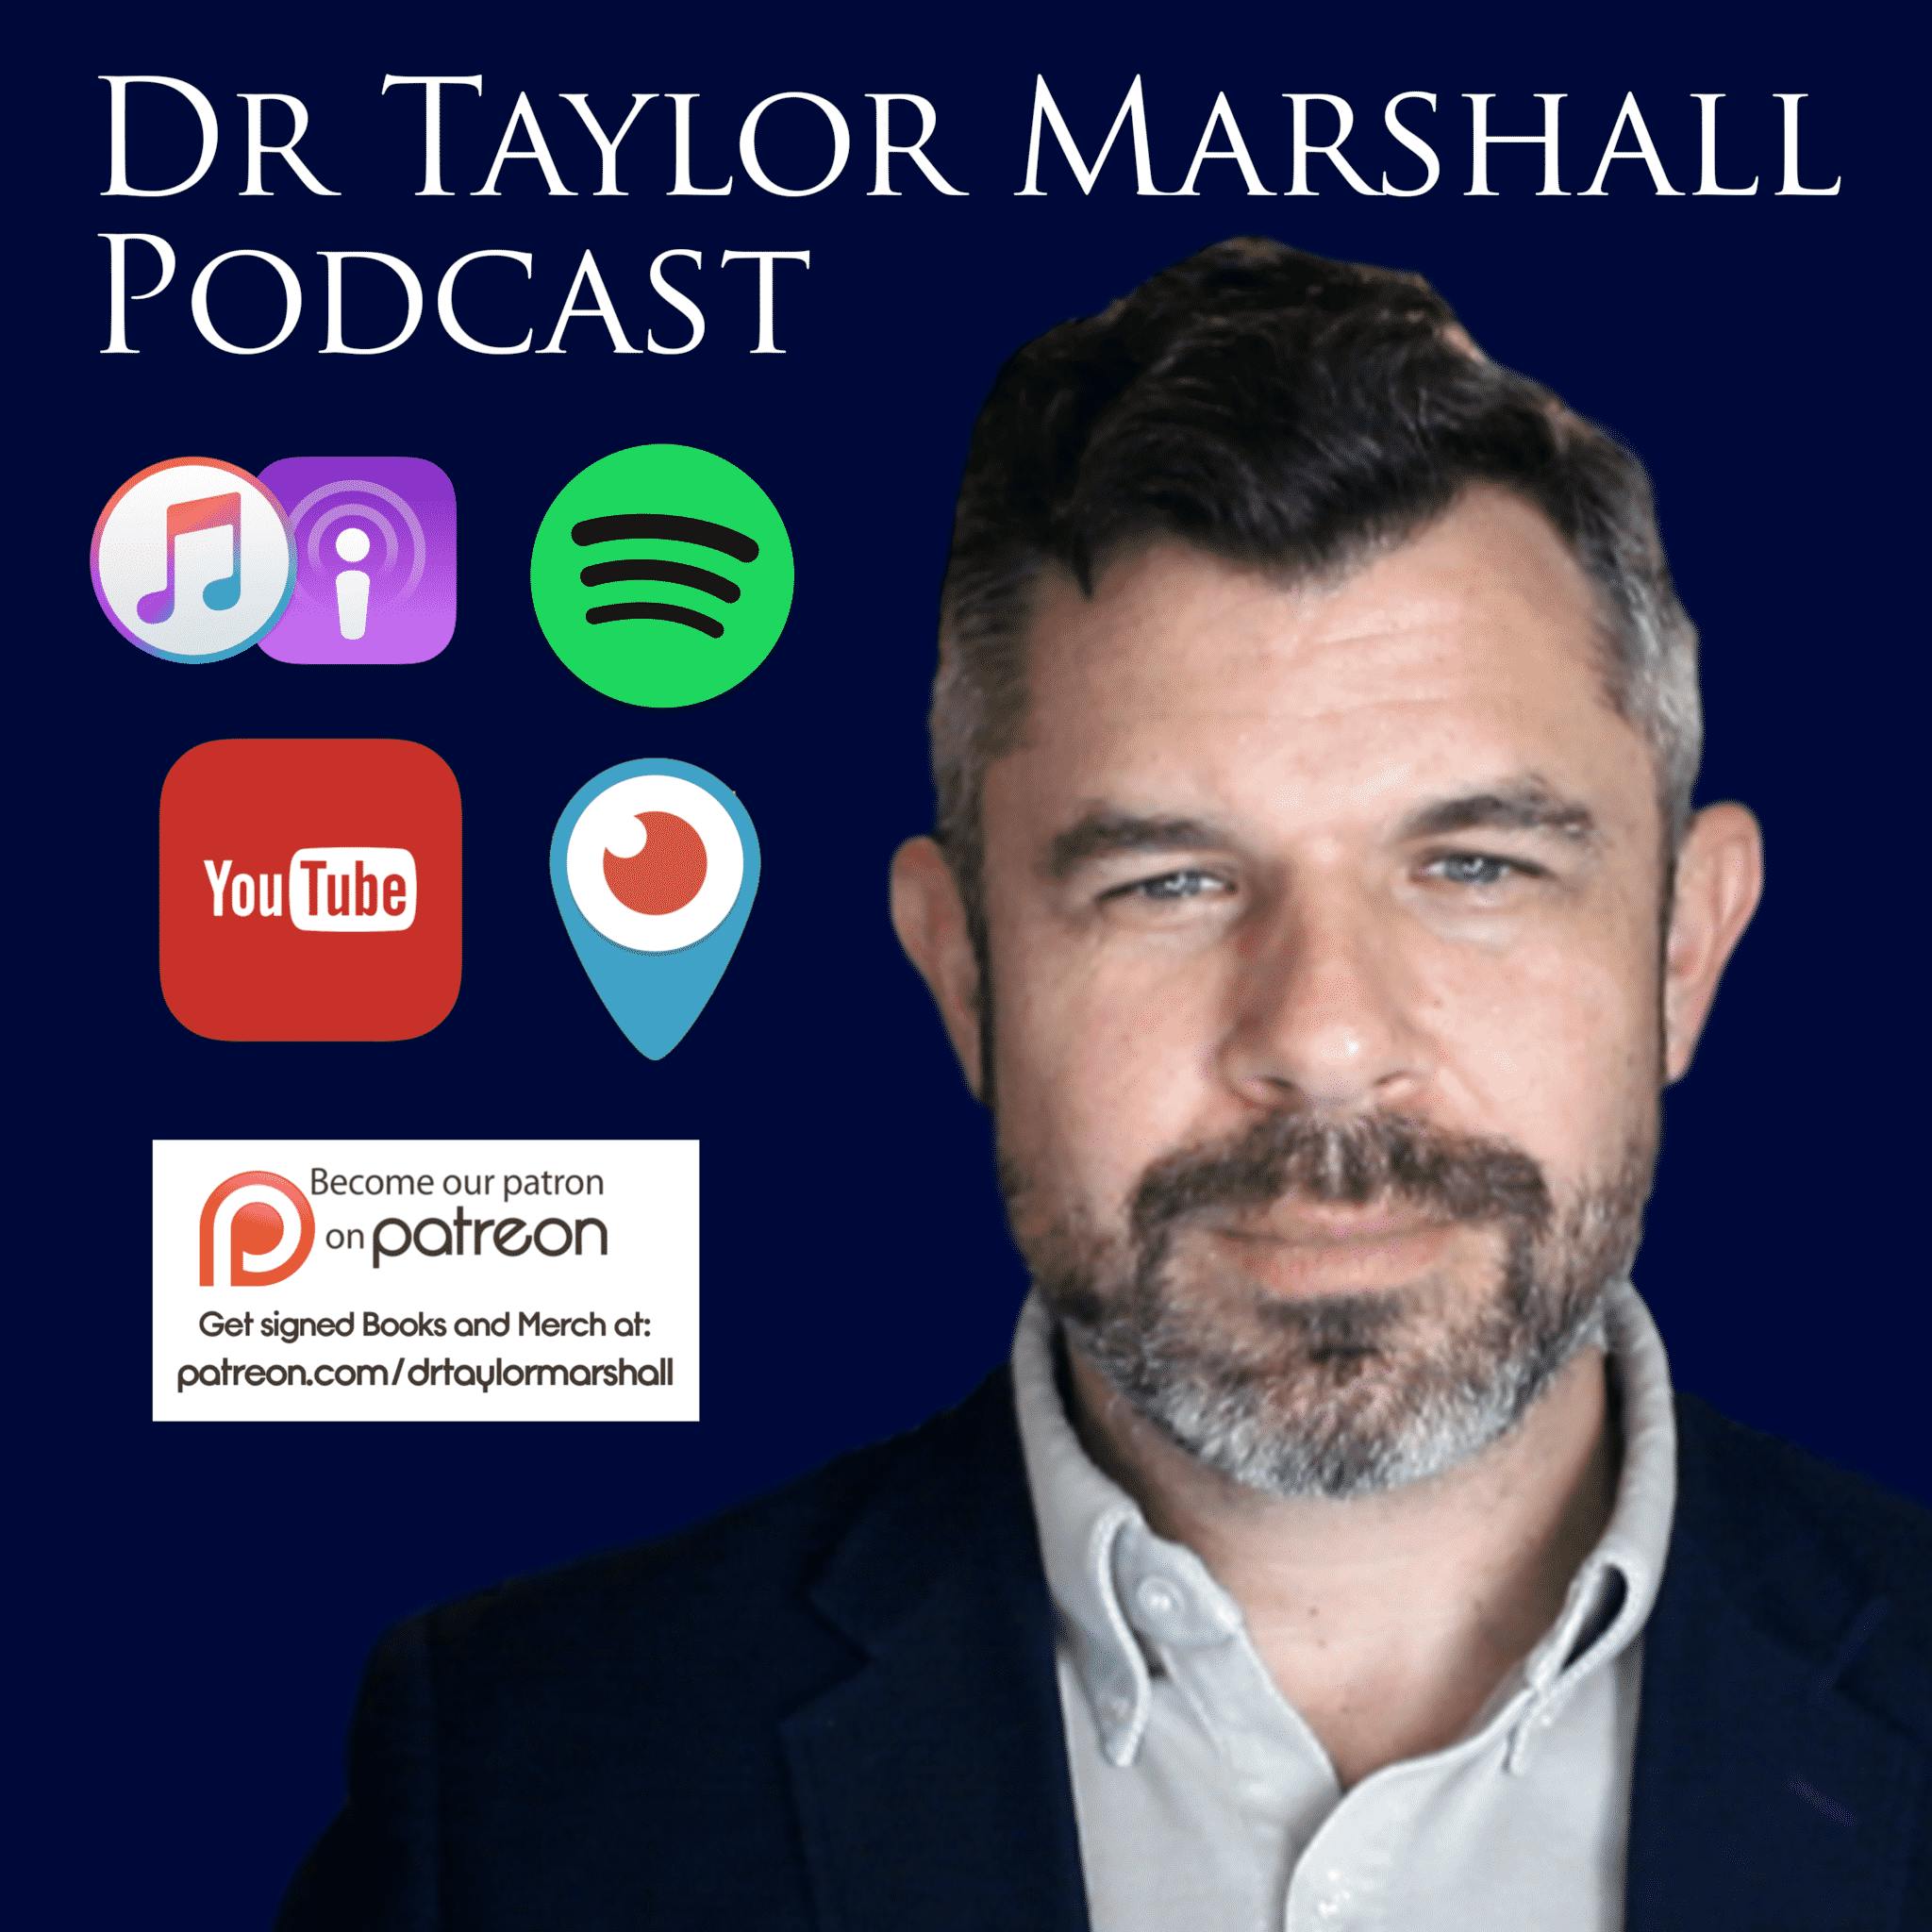 917: Cardinal Pell has died in Rome – Dr. Taylor Marshall responds [Podcast]